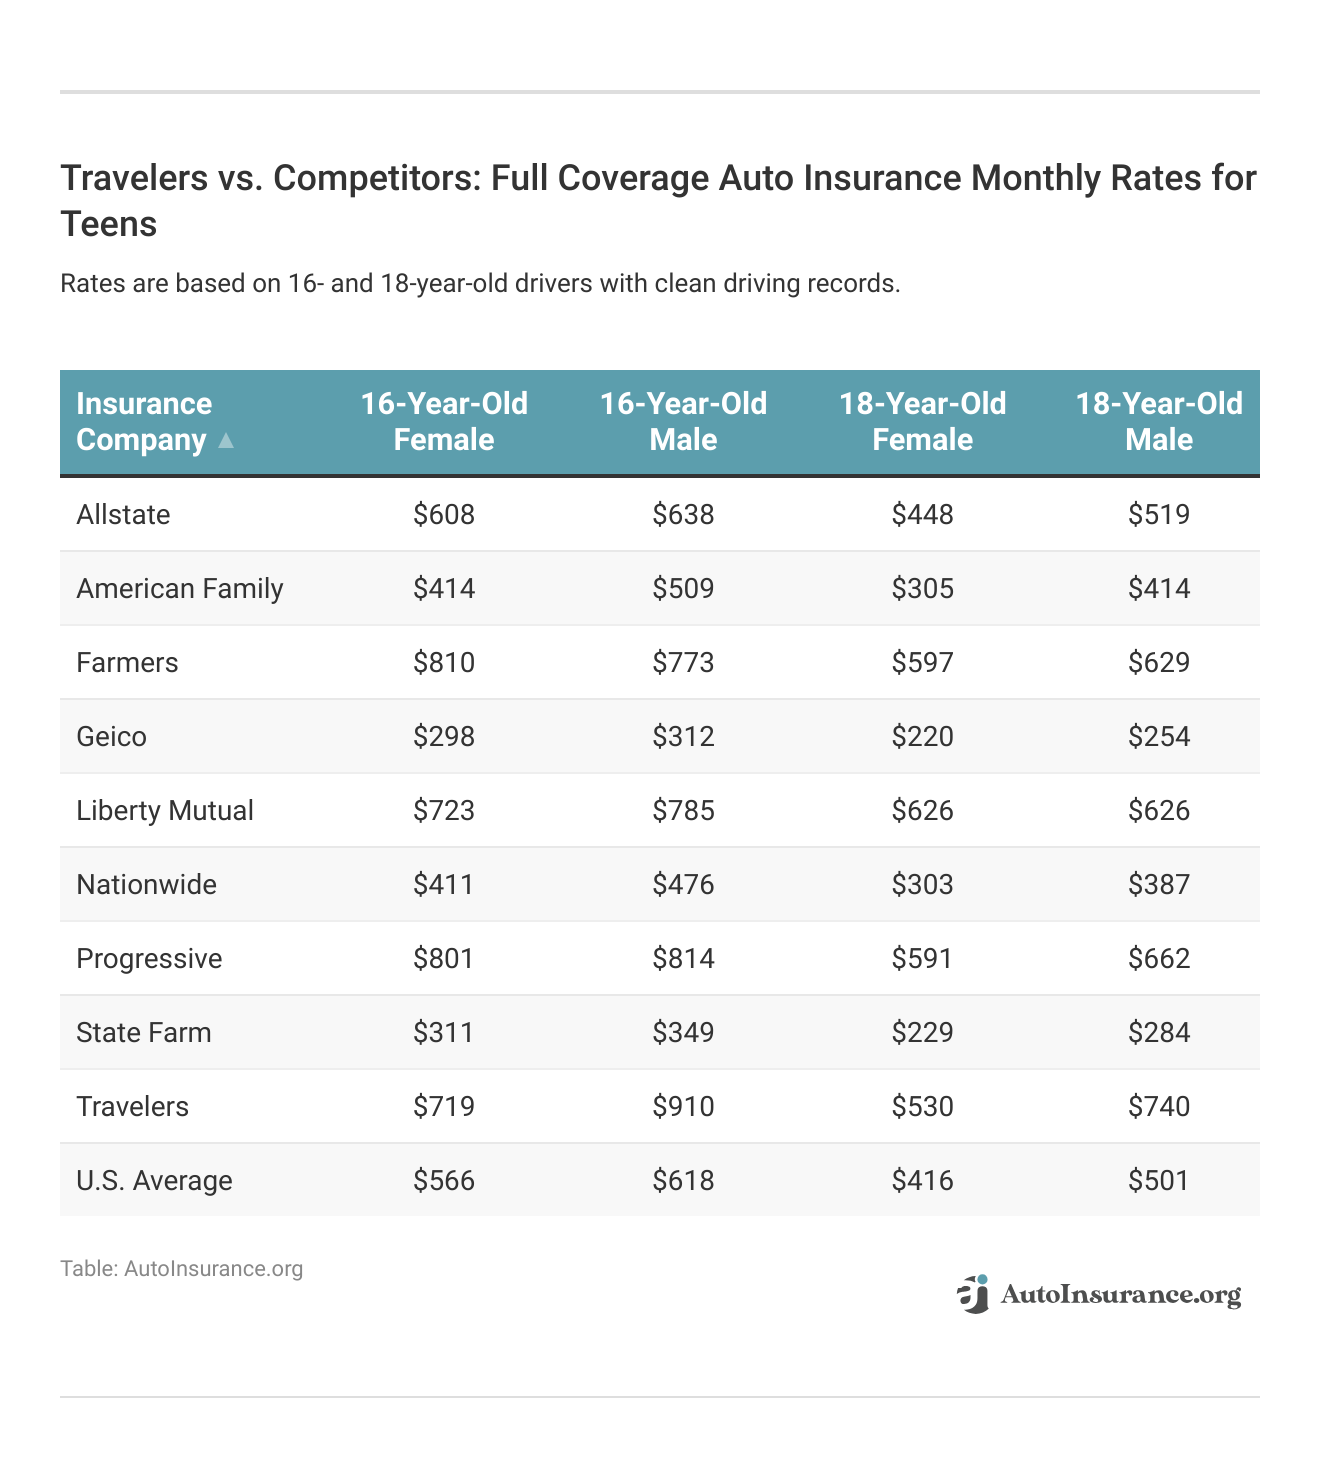 <h3>Travelers vs. Competitors: Full Coverage Auto Insurance Monthly Rates for Teens</h3>